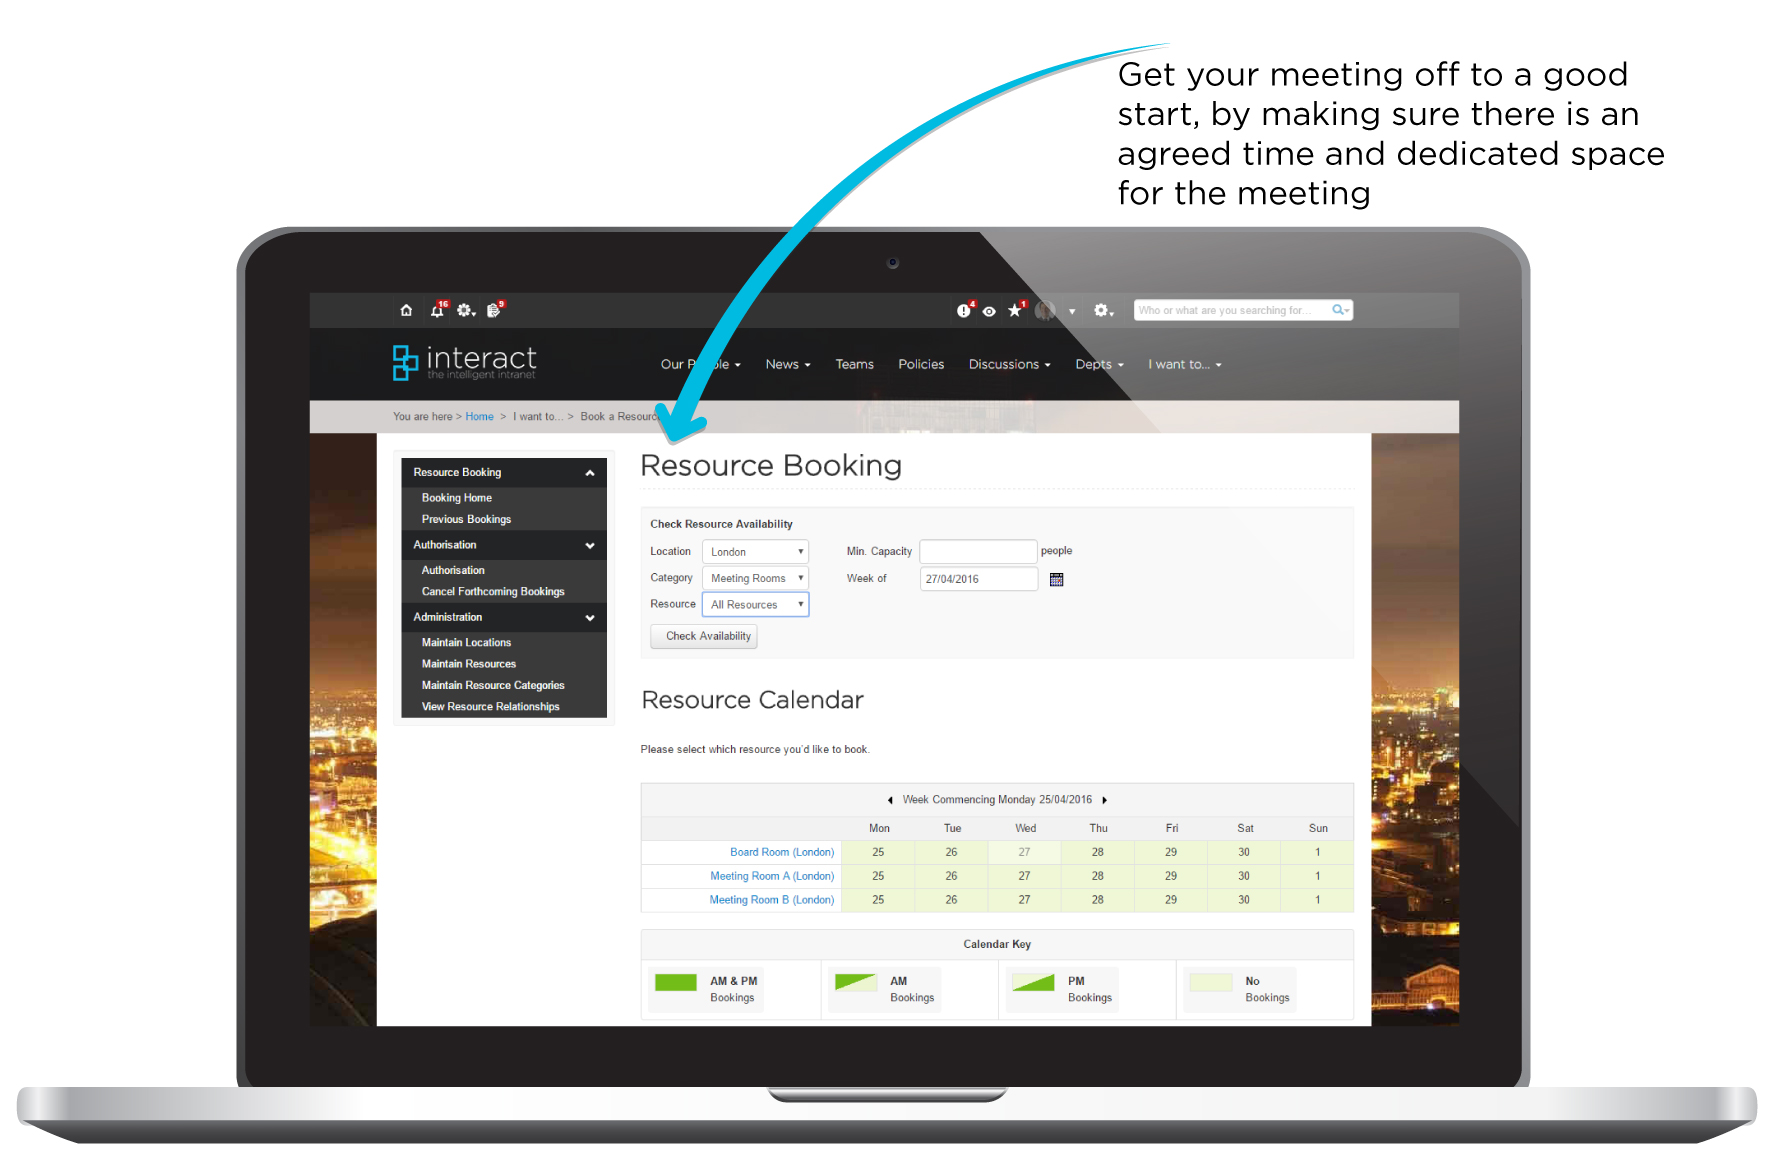 Room and resource booking interact